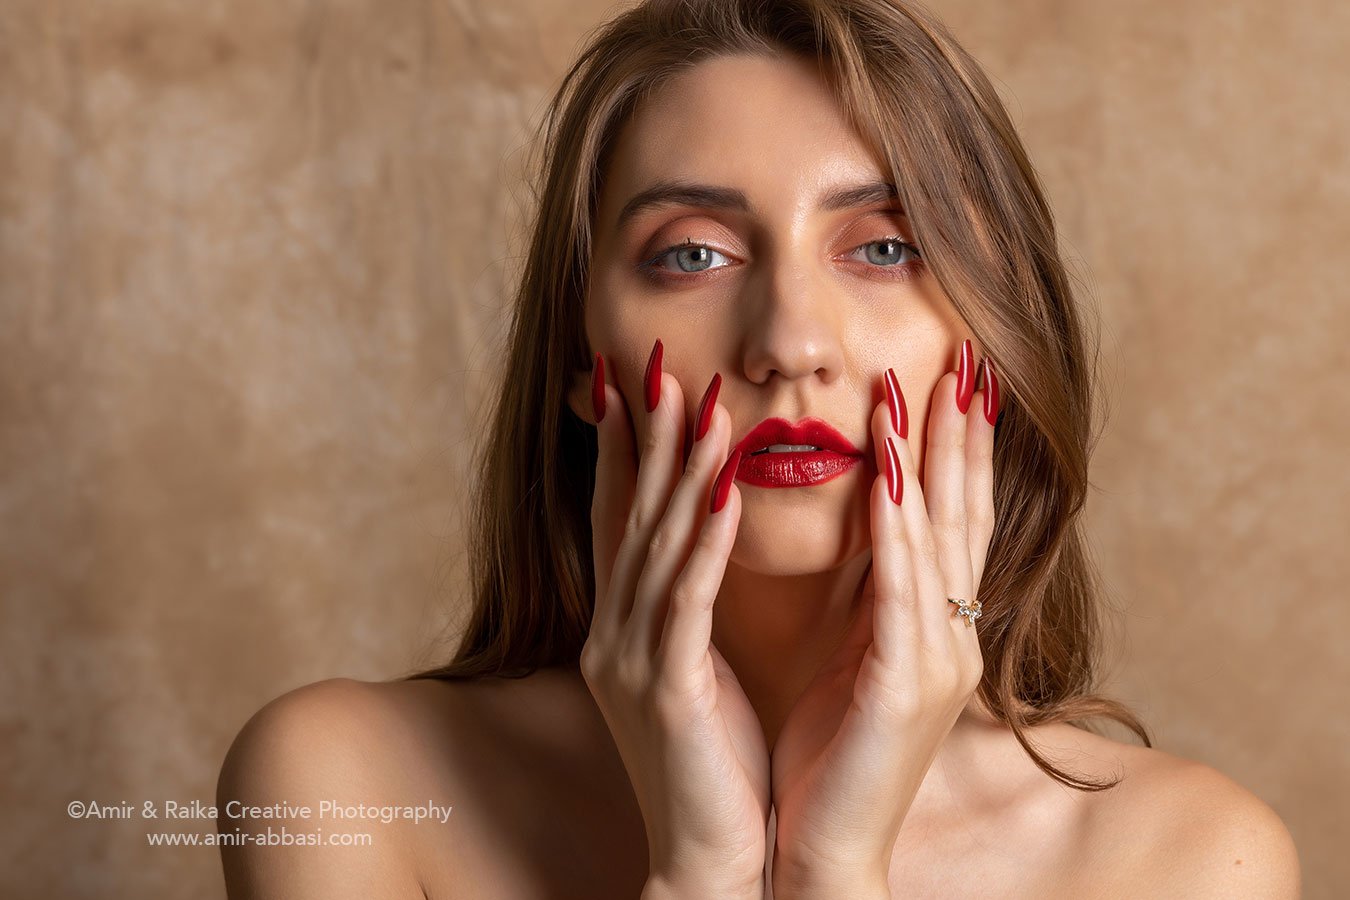 Creative Stick-on Nails photography on model